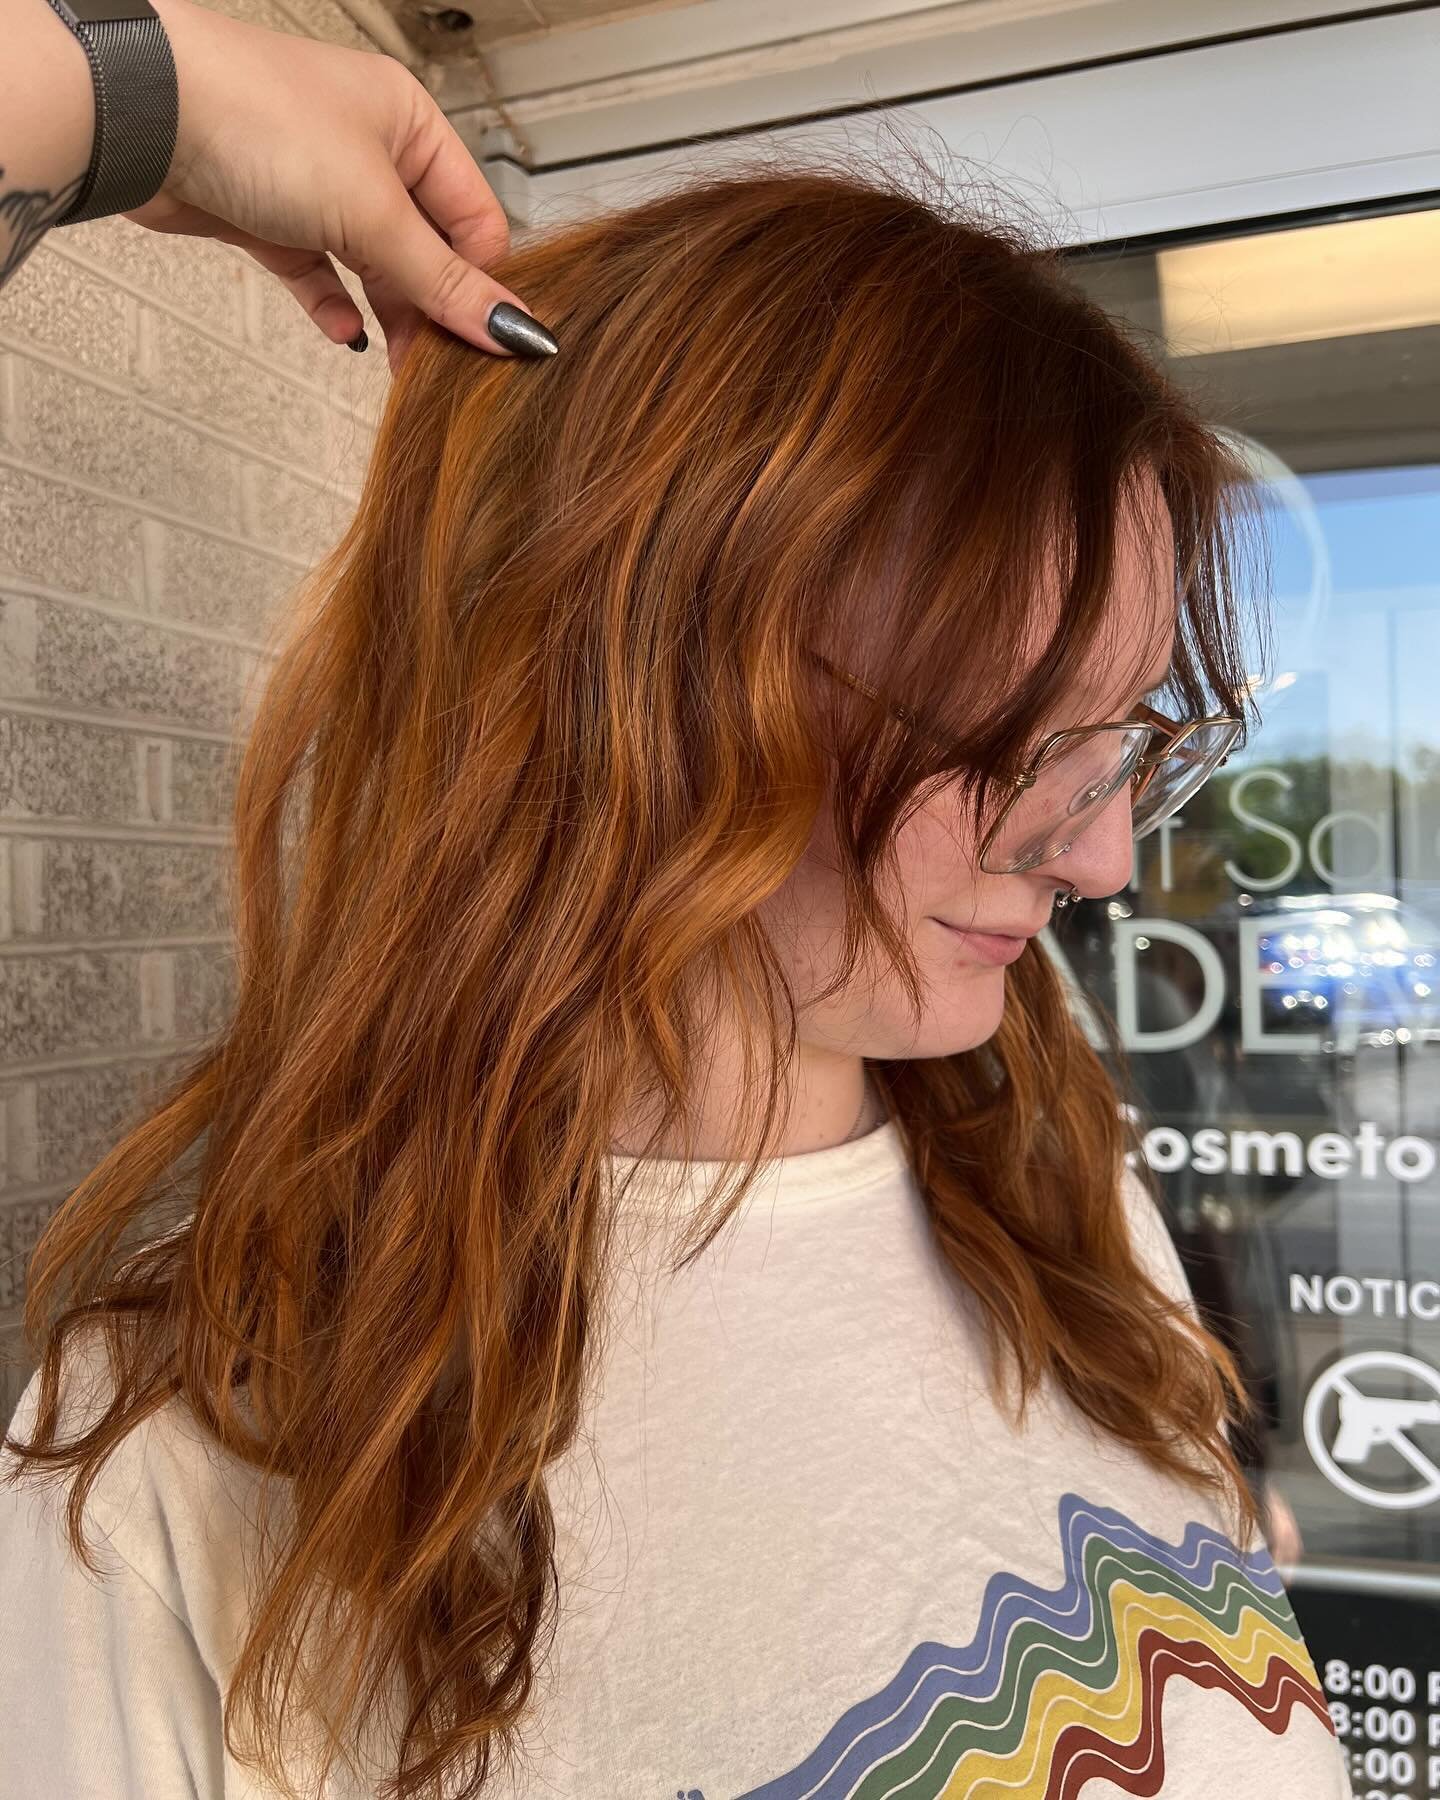 We love a copper queen!! Love this dimension we added on @faithmay160 !!!
-
-
-
-
-
-
-
I am down to my last 2 months of school! Book your spot while you can! 
#cosschool #cosstudent #cosmetology #hairstylist #althairstylist #althair #copper #balayag